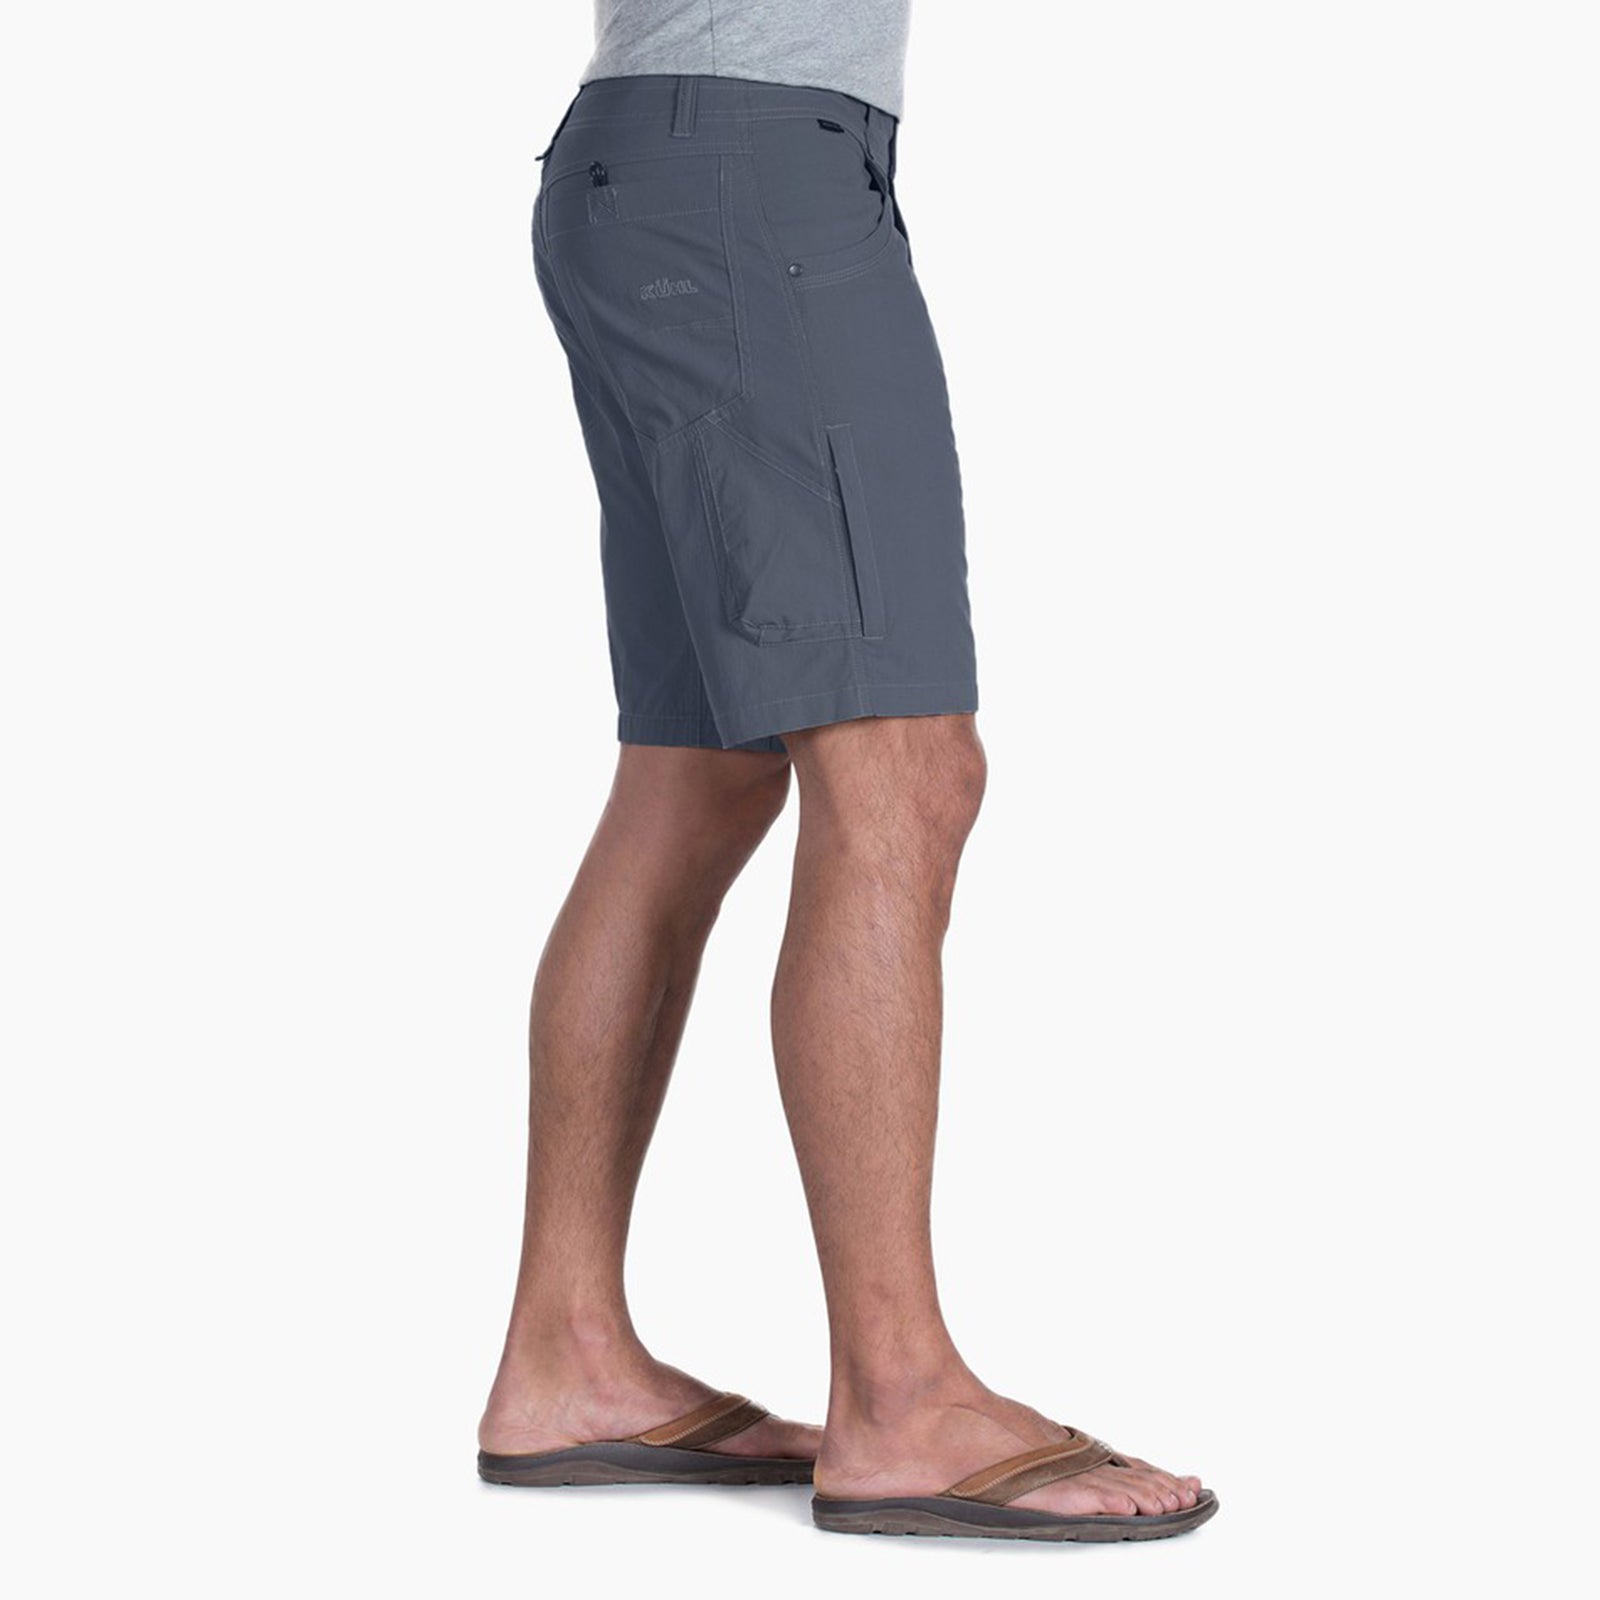 kuhl hiking shorts mens on model side view in color blue grey